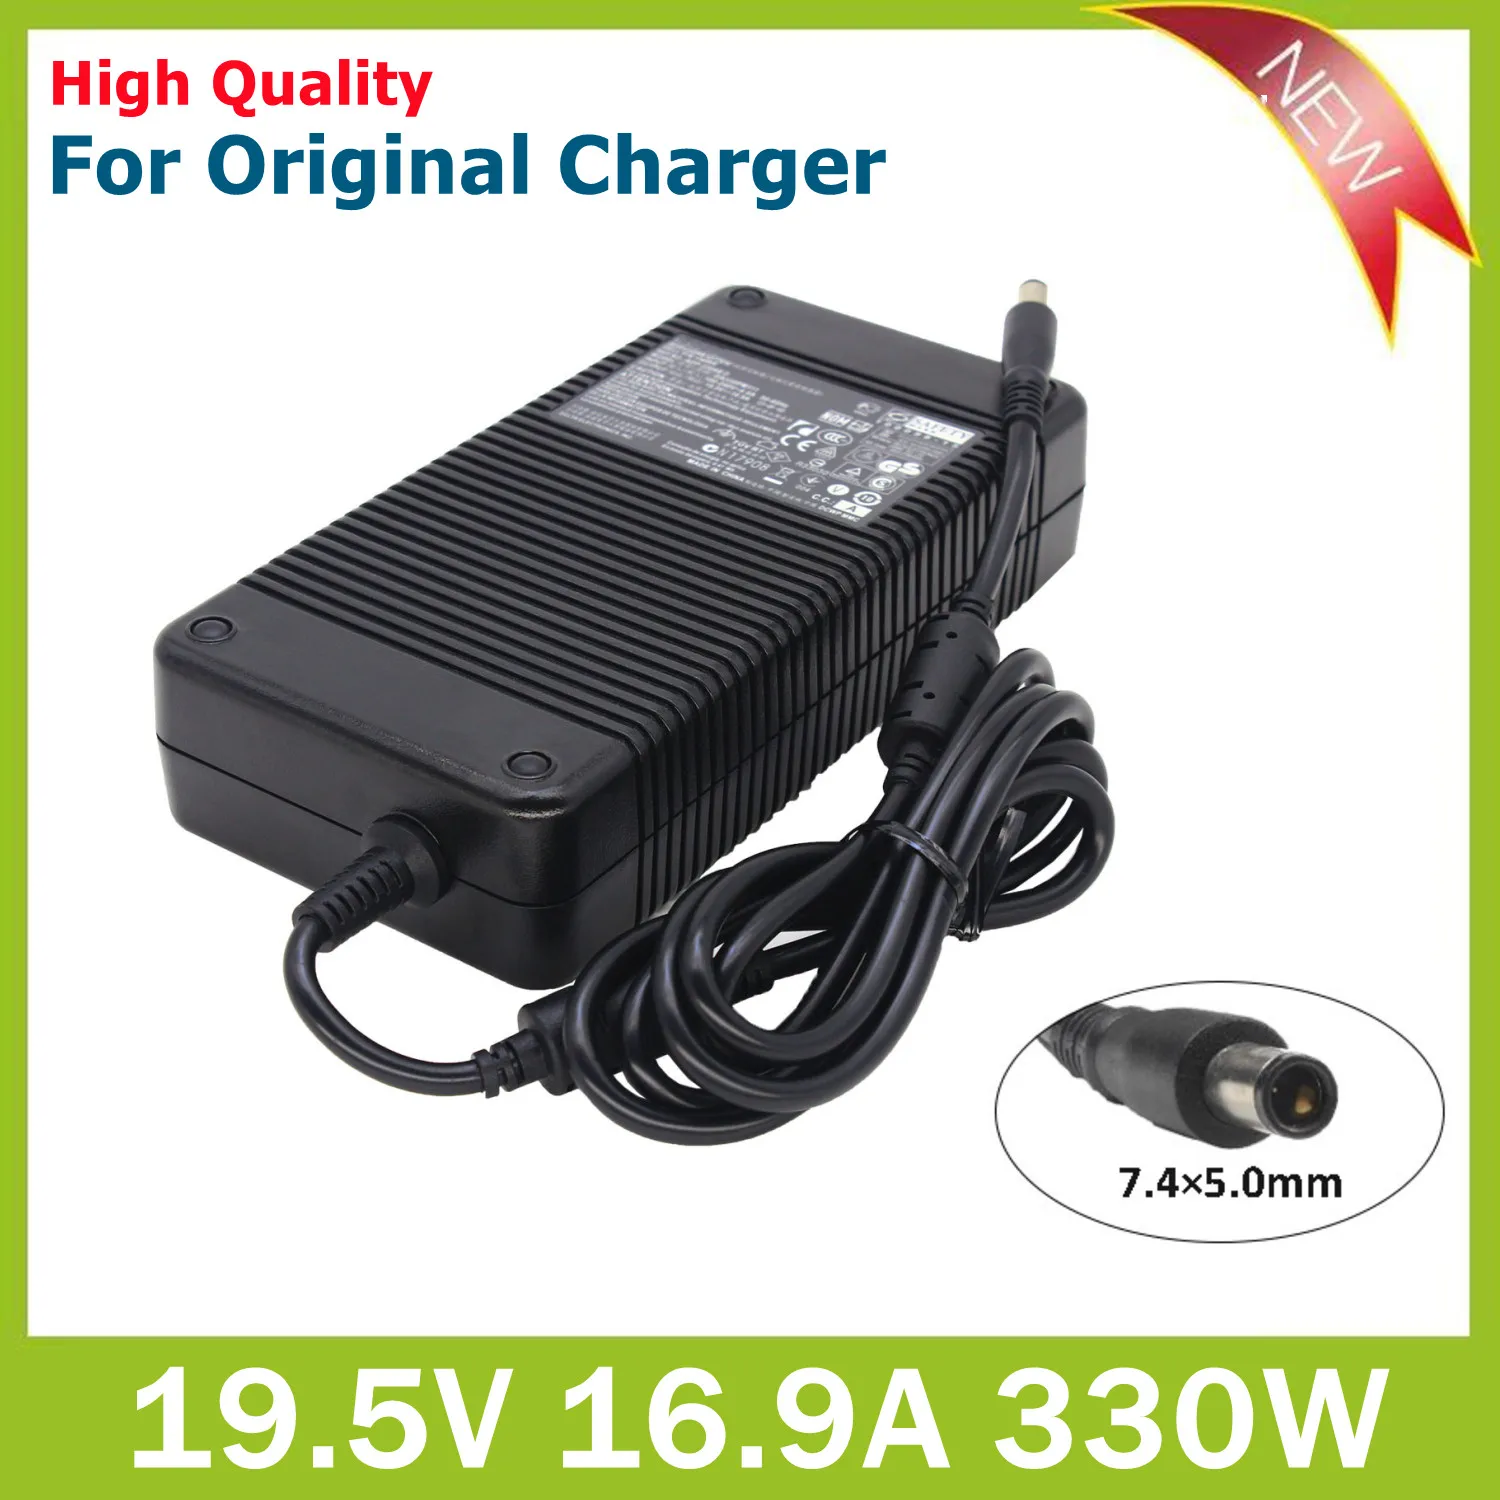 19.5V 16.9A 330W ADP-330AB D AC Laptop Charger Adapter for Dell Alienware M18X R1 R2 R3 17 R1 R4 R5 X51 Y90RR Power Supply